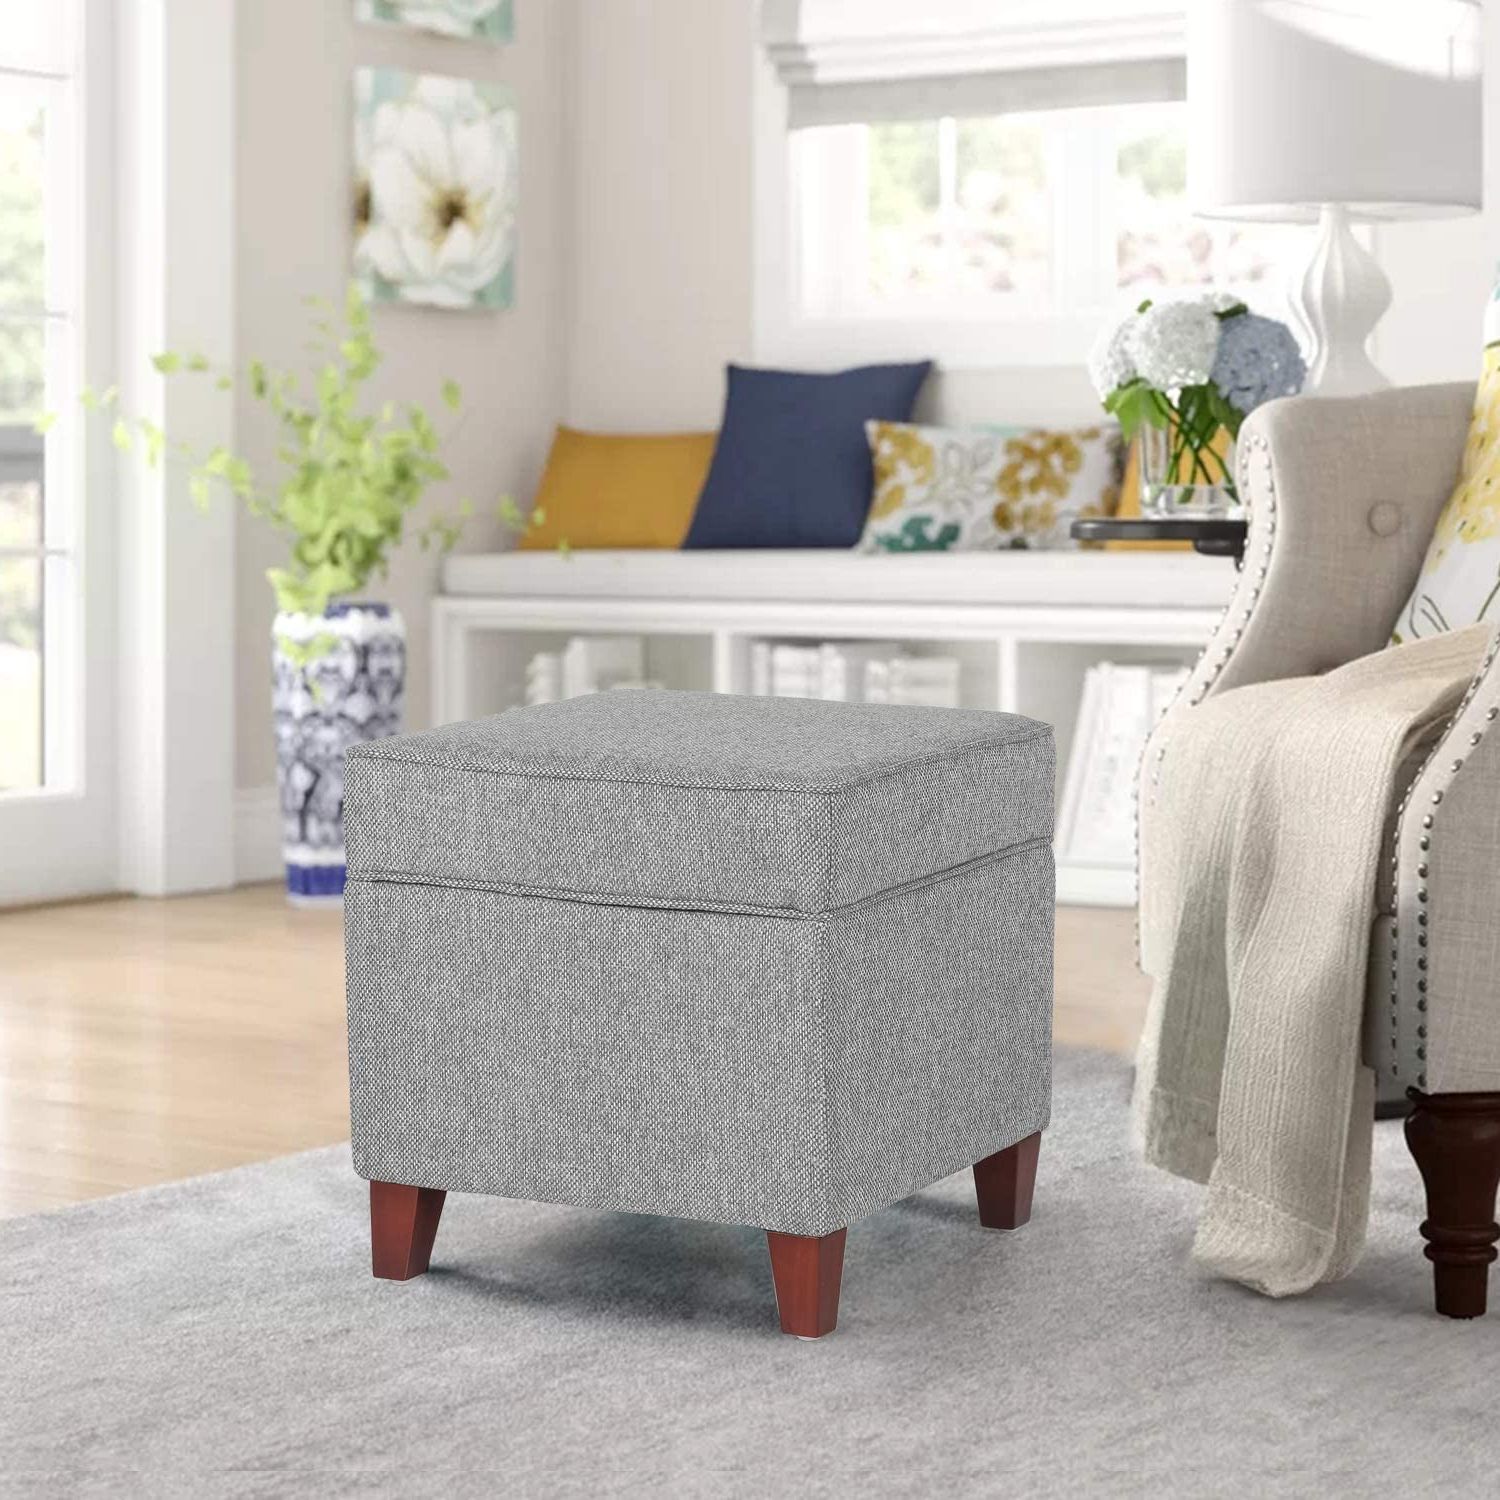 Natural Fabric Square Ottomans Regarding Most Up To Date Homebeez 17'' Square Ottoman With Storage  Small Storage Ottoman Foot (View 5 of 10)